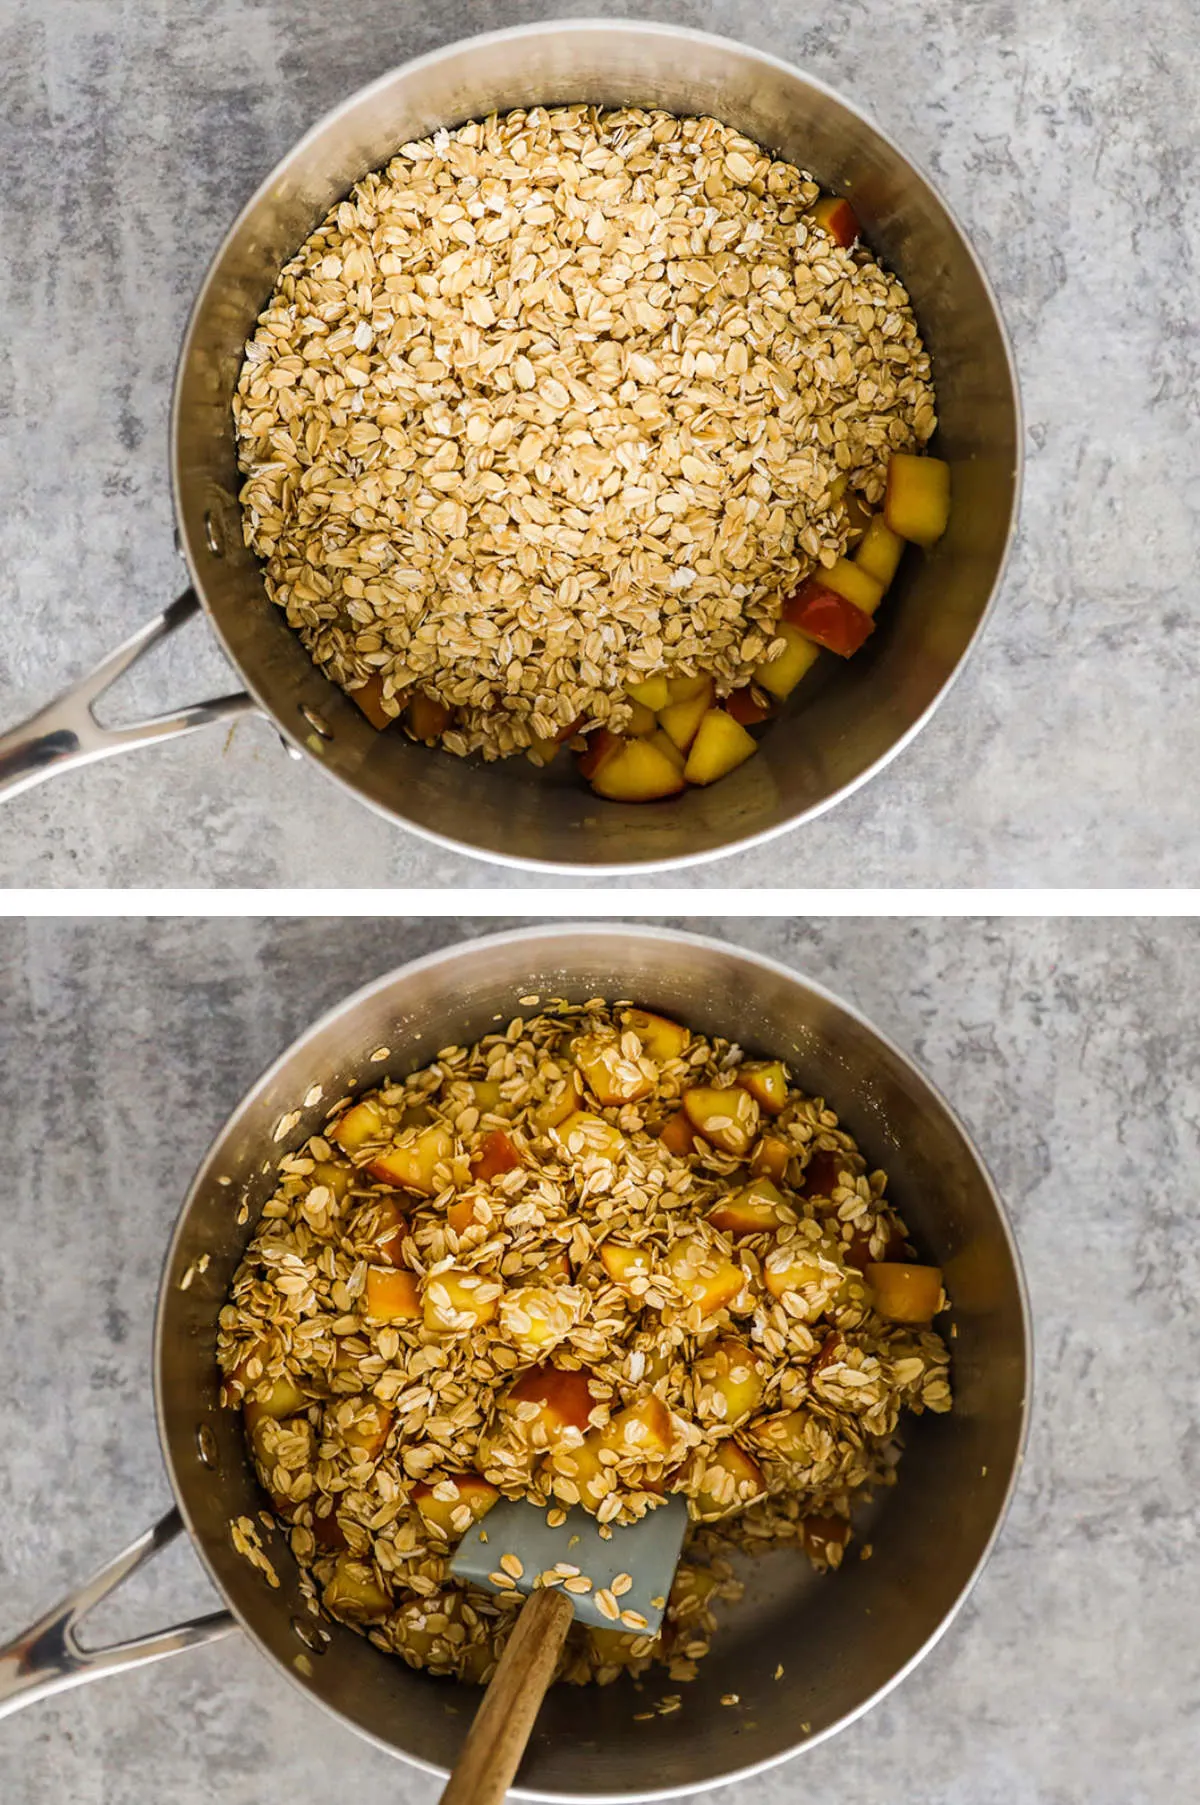 Two overhead images in one: 1. Rolled oats added to pot with sauteed apples. 2. Oats have been heated and mixed with apple chunks. 